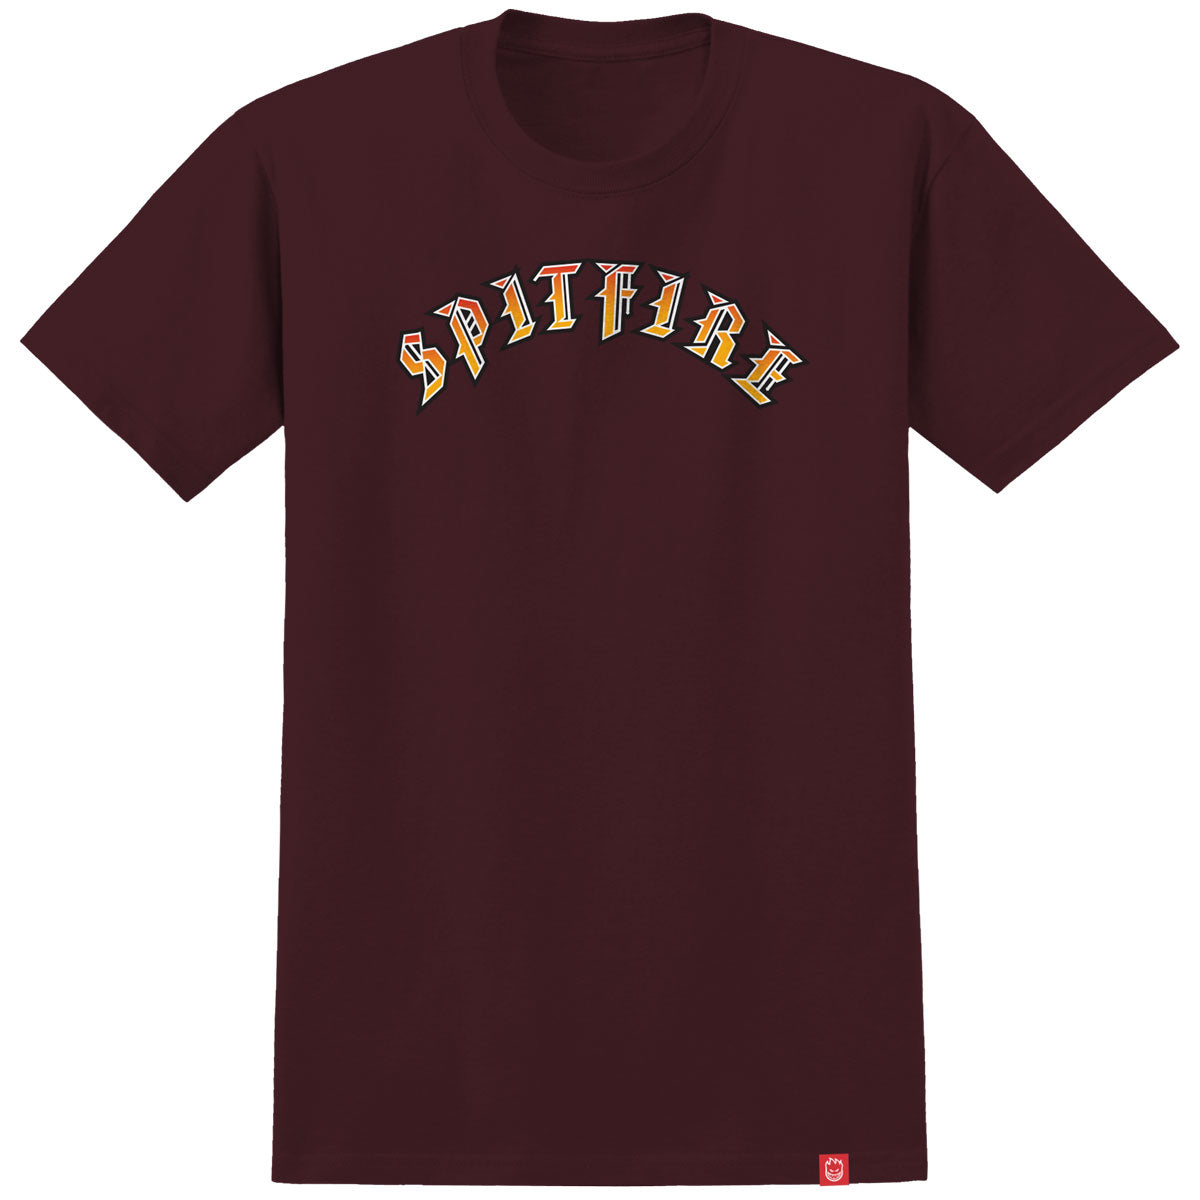 Spitfire Old E Fade Fill T-Shirt - Maroon/Red/Gold Fade image 1